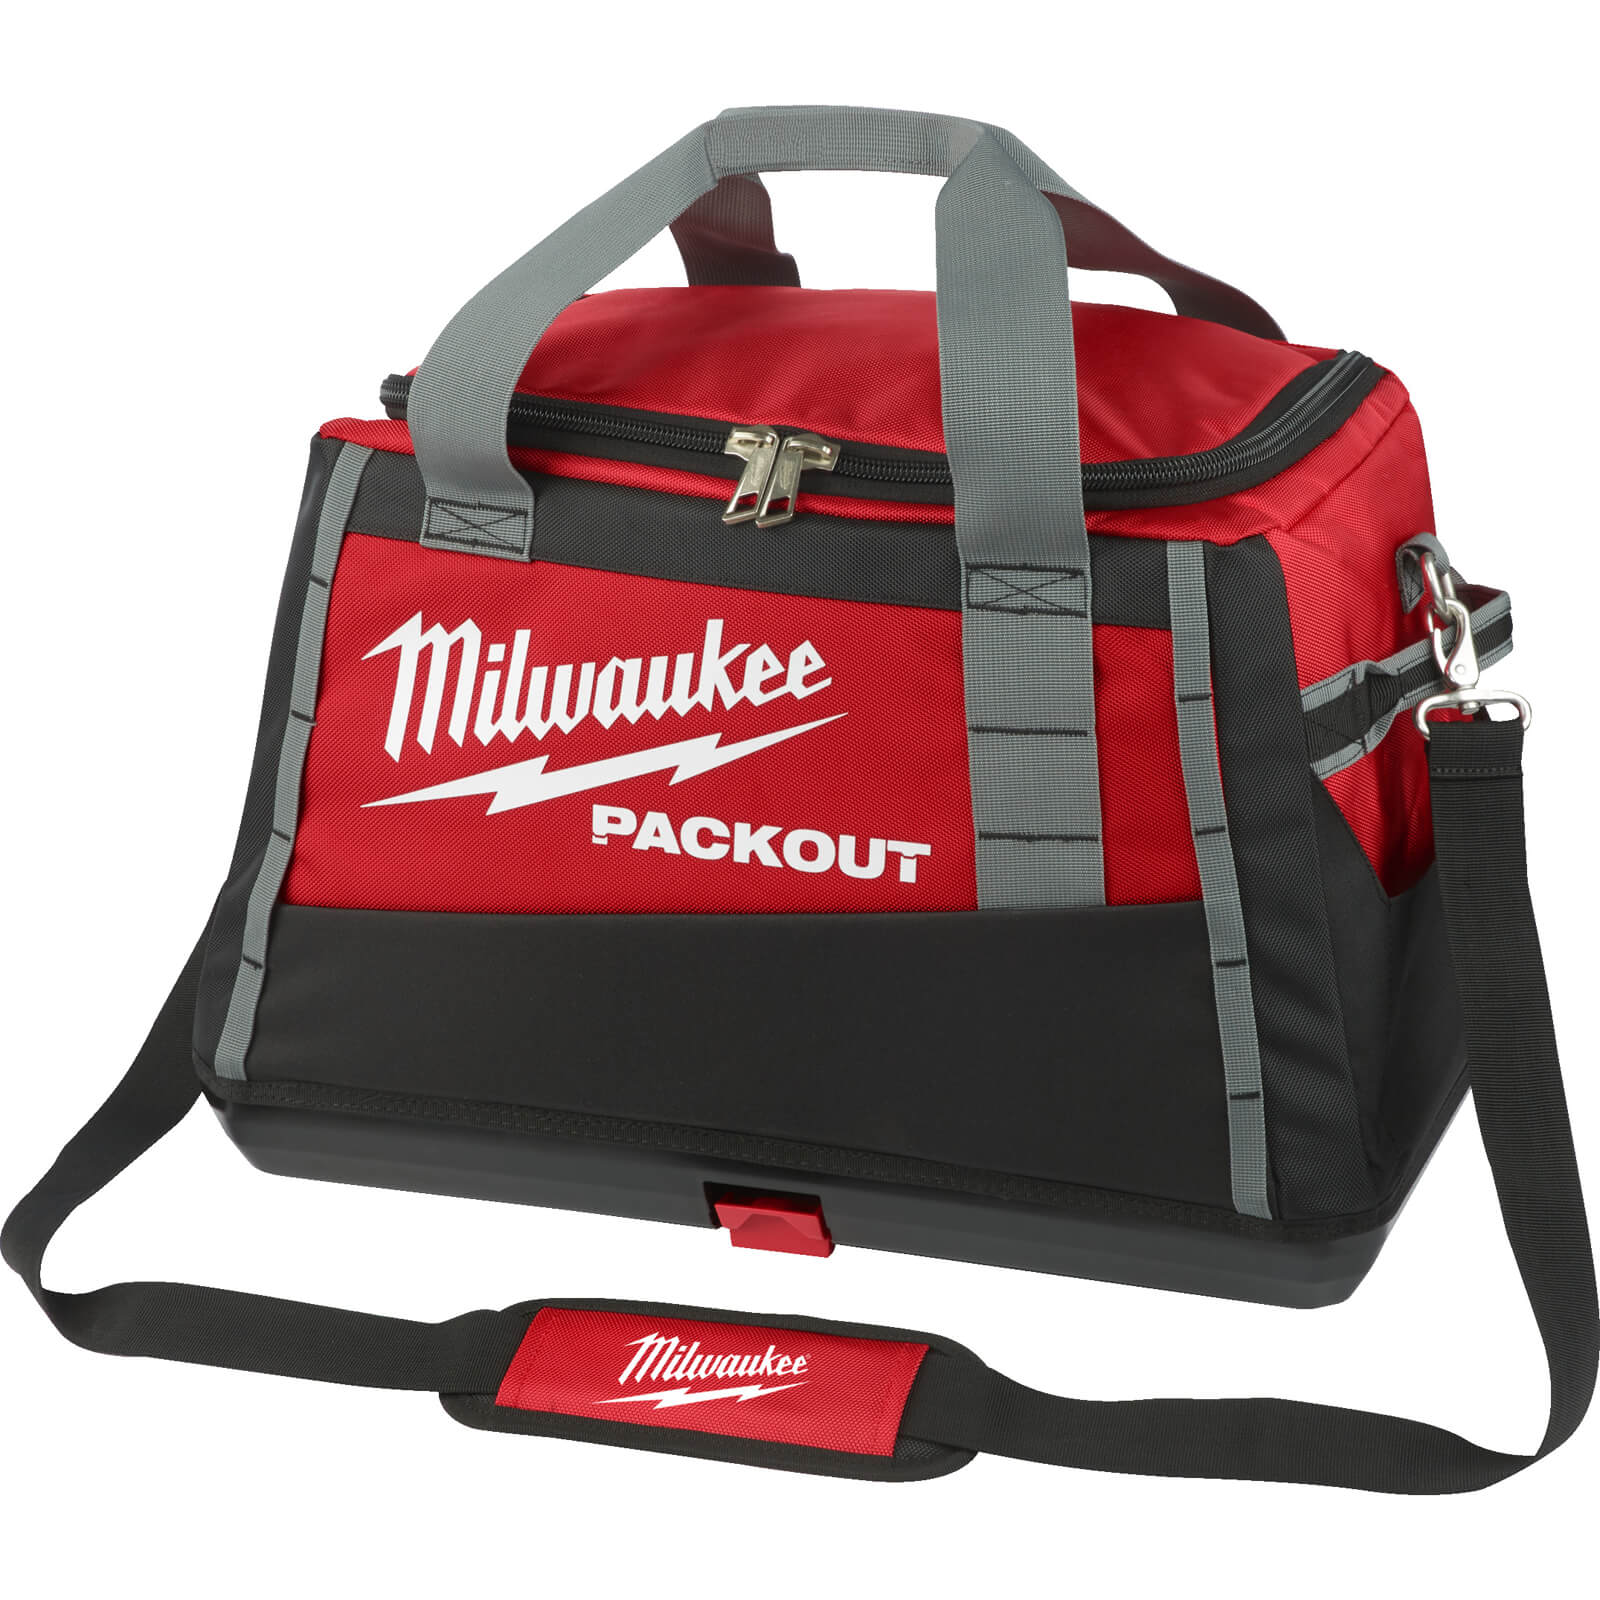 Image of Milwaukee Packout Duffel Bag 500mm